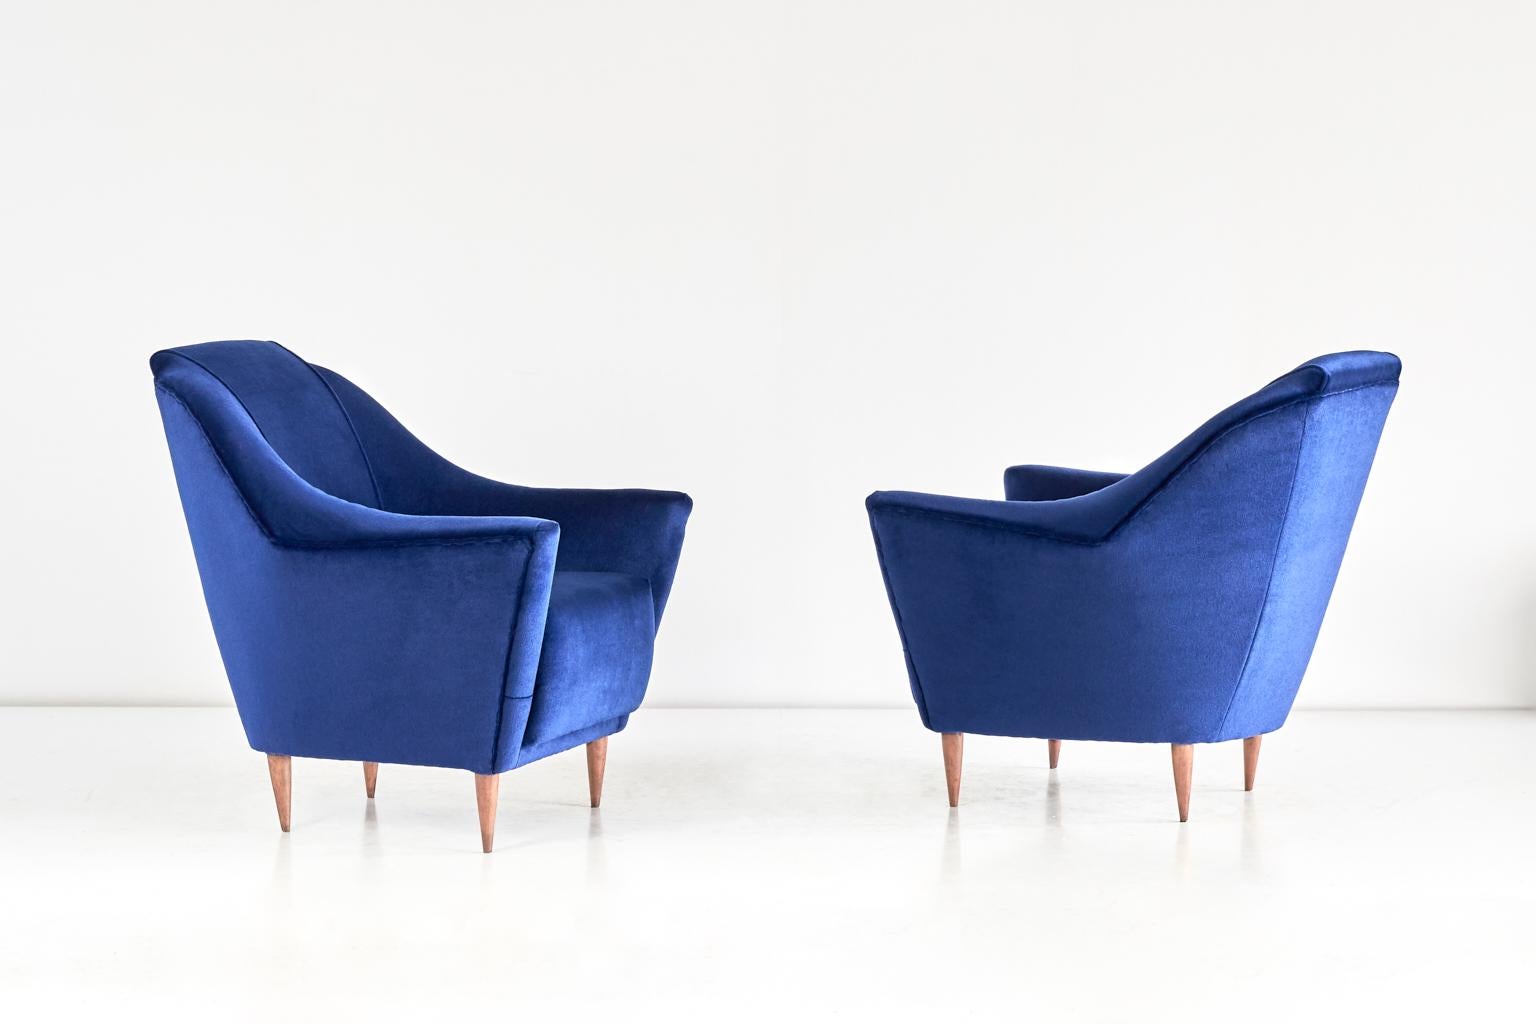 Mid-20th Century Pair of Ico Parisi Armchairs in Blue Velvet for Ariberto Colombo, Italy, 1951 For Sale